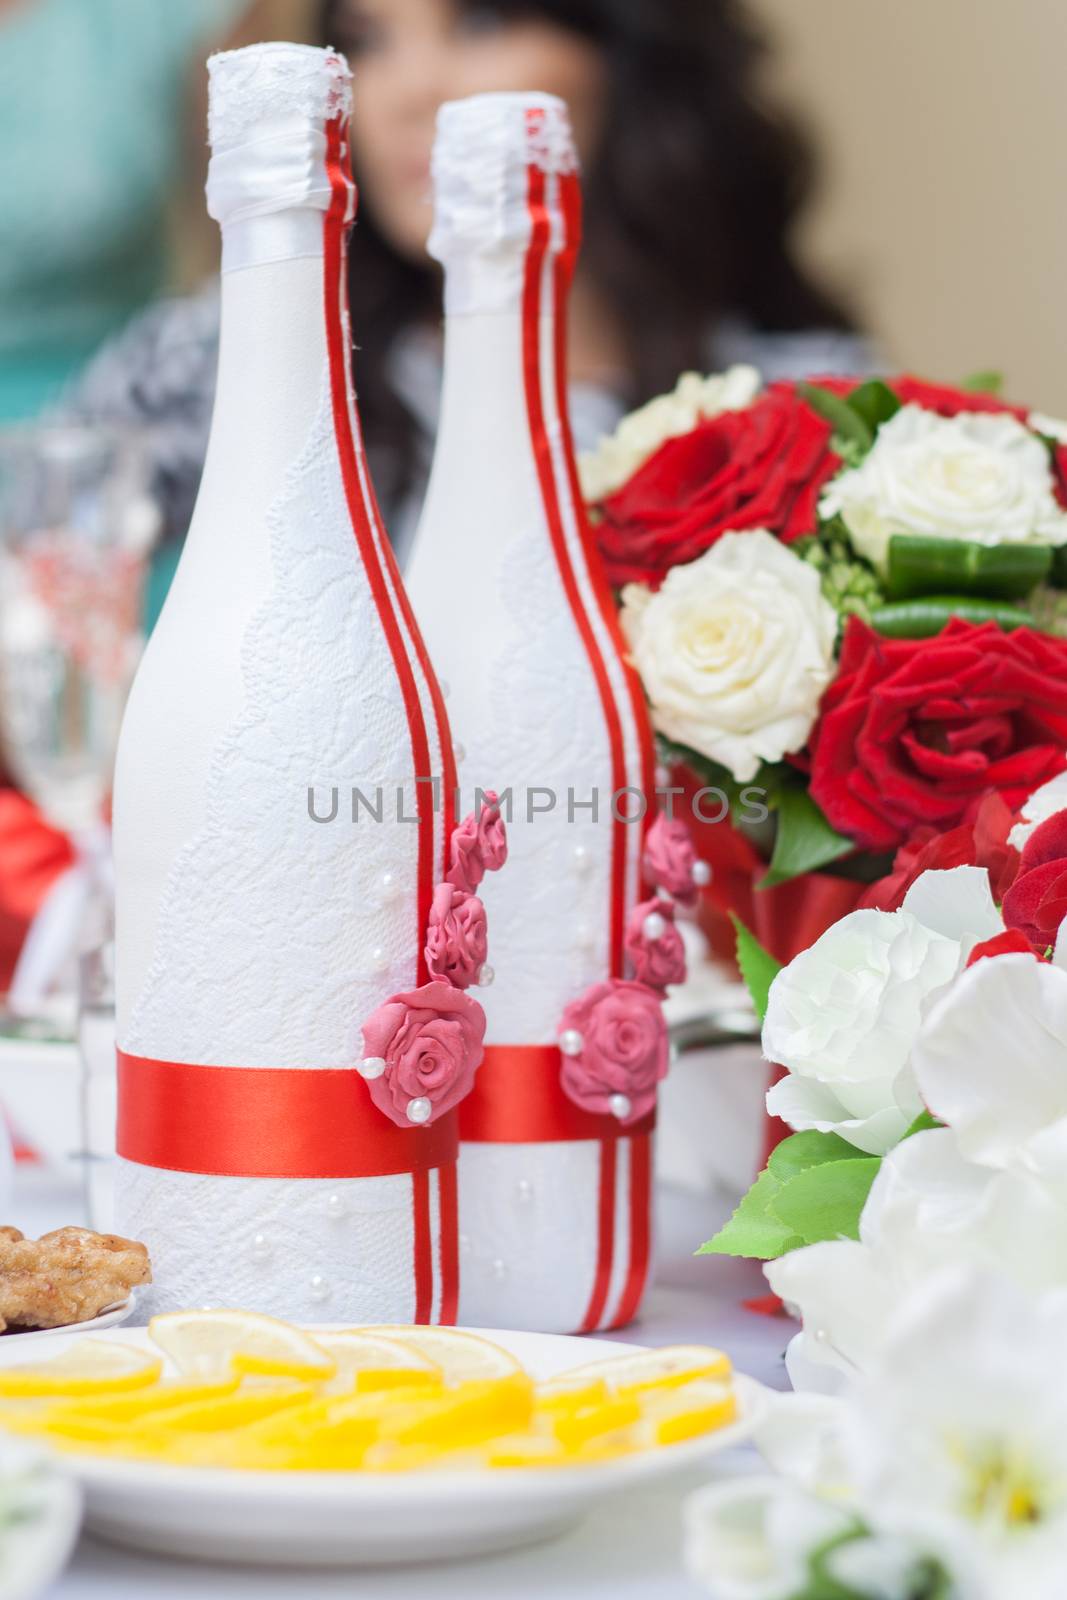 Two bottles of champagne decorated for a wedding